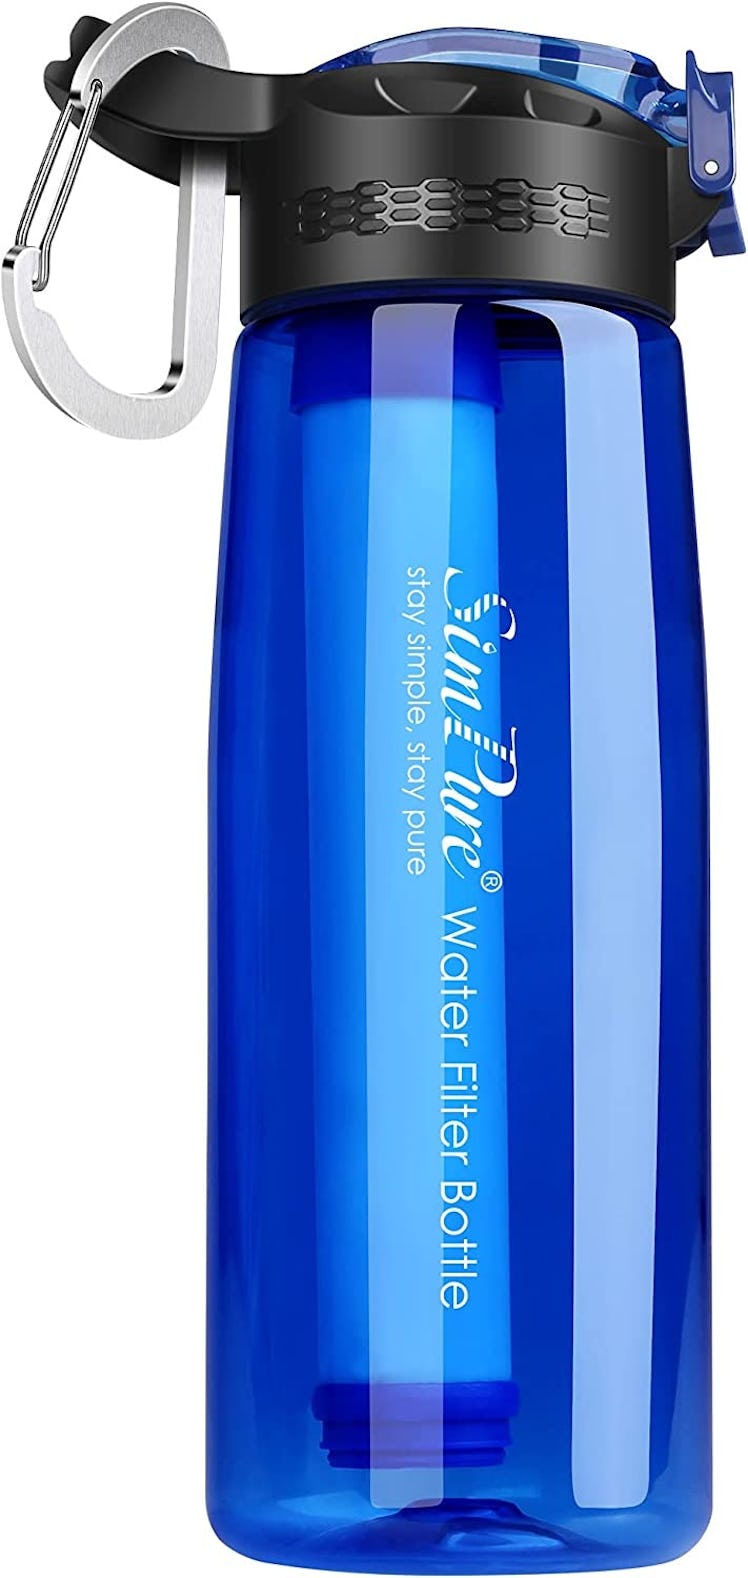 The SimPure Filtered Water Bottle includes a four-stage filter straw that removes sediment, chlorine...